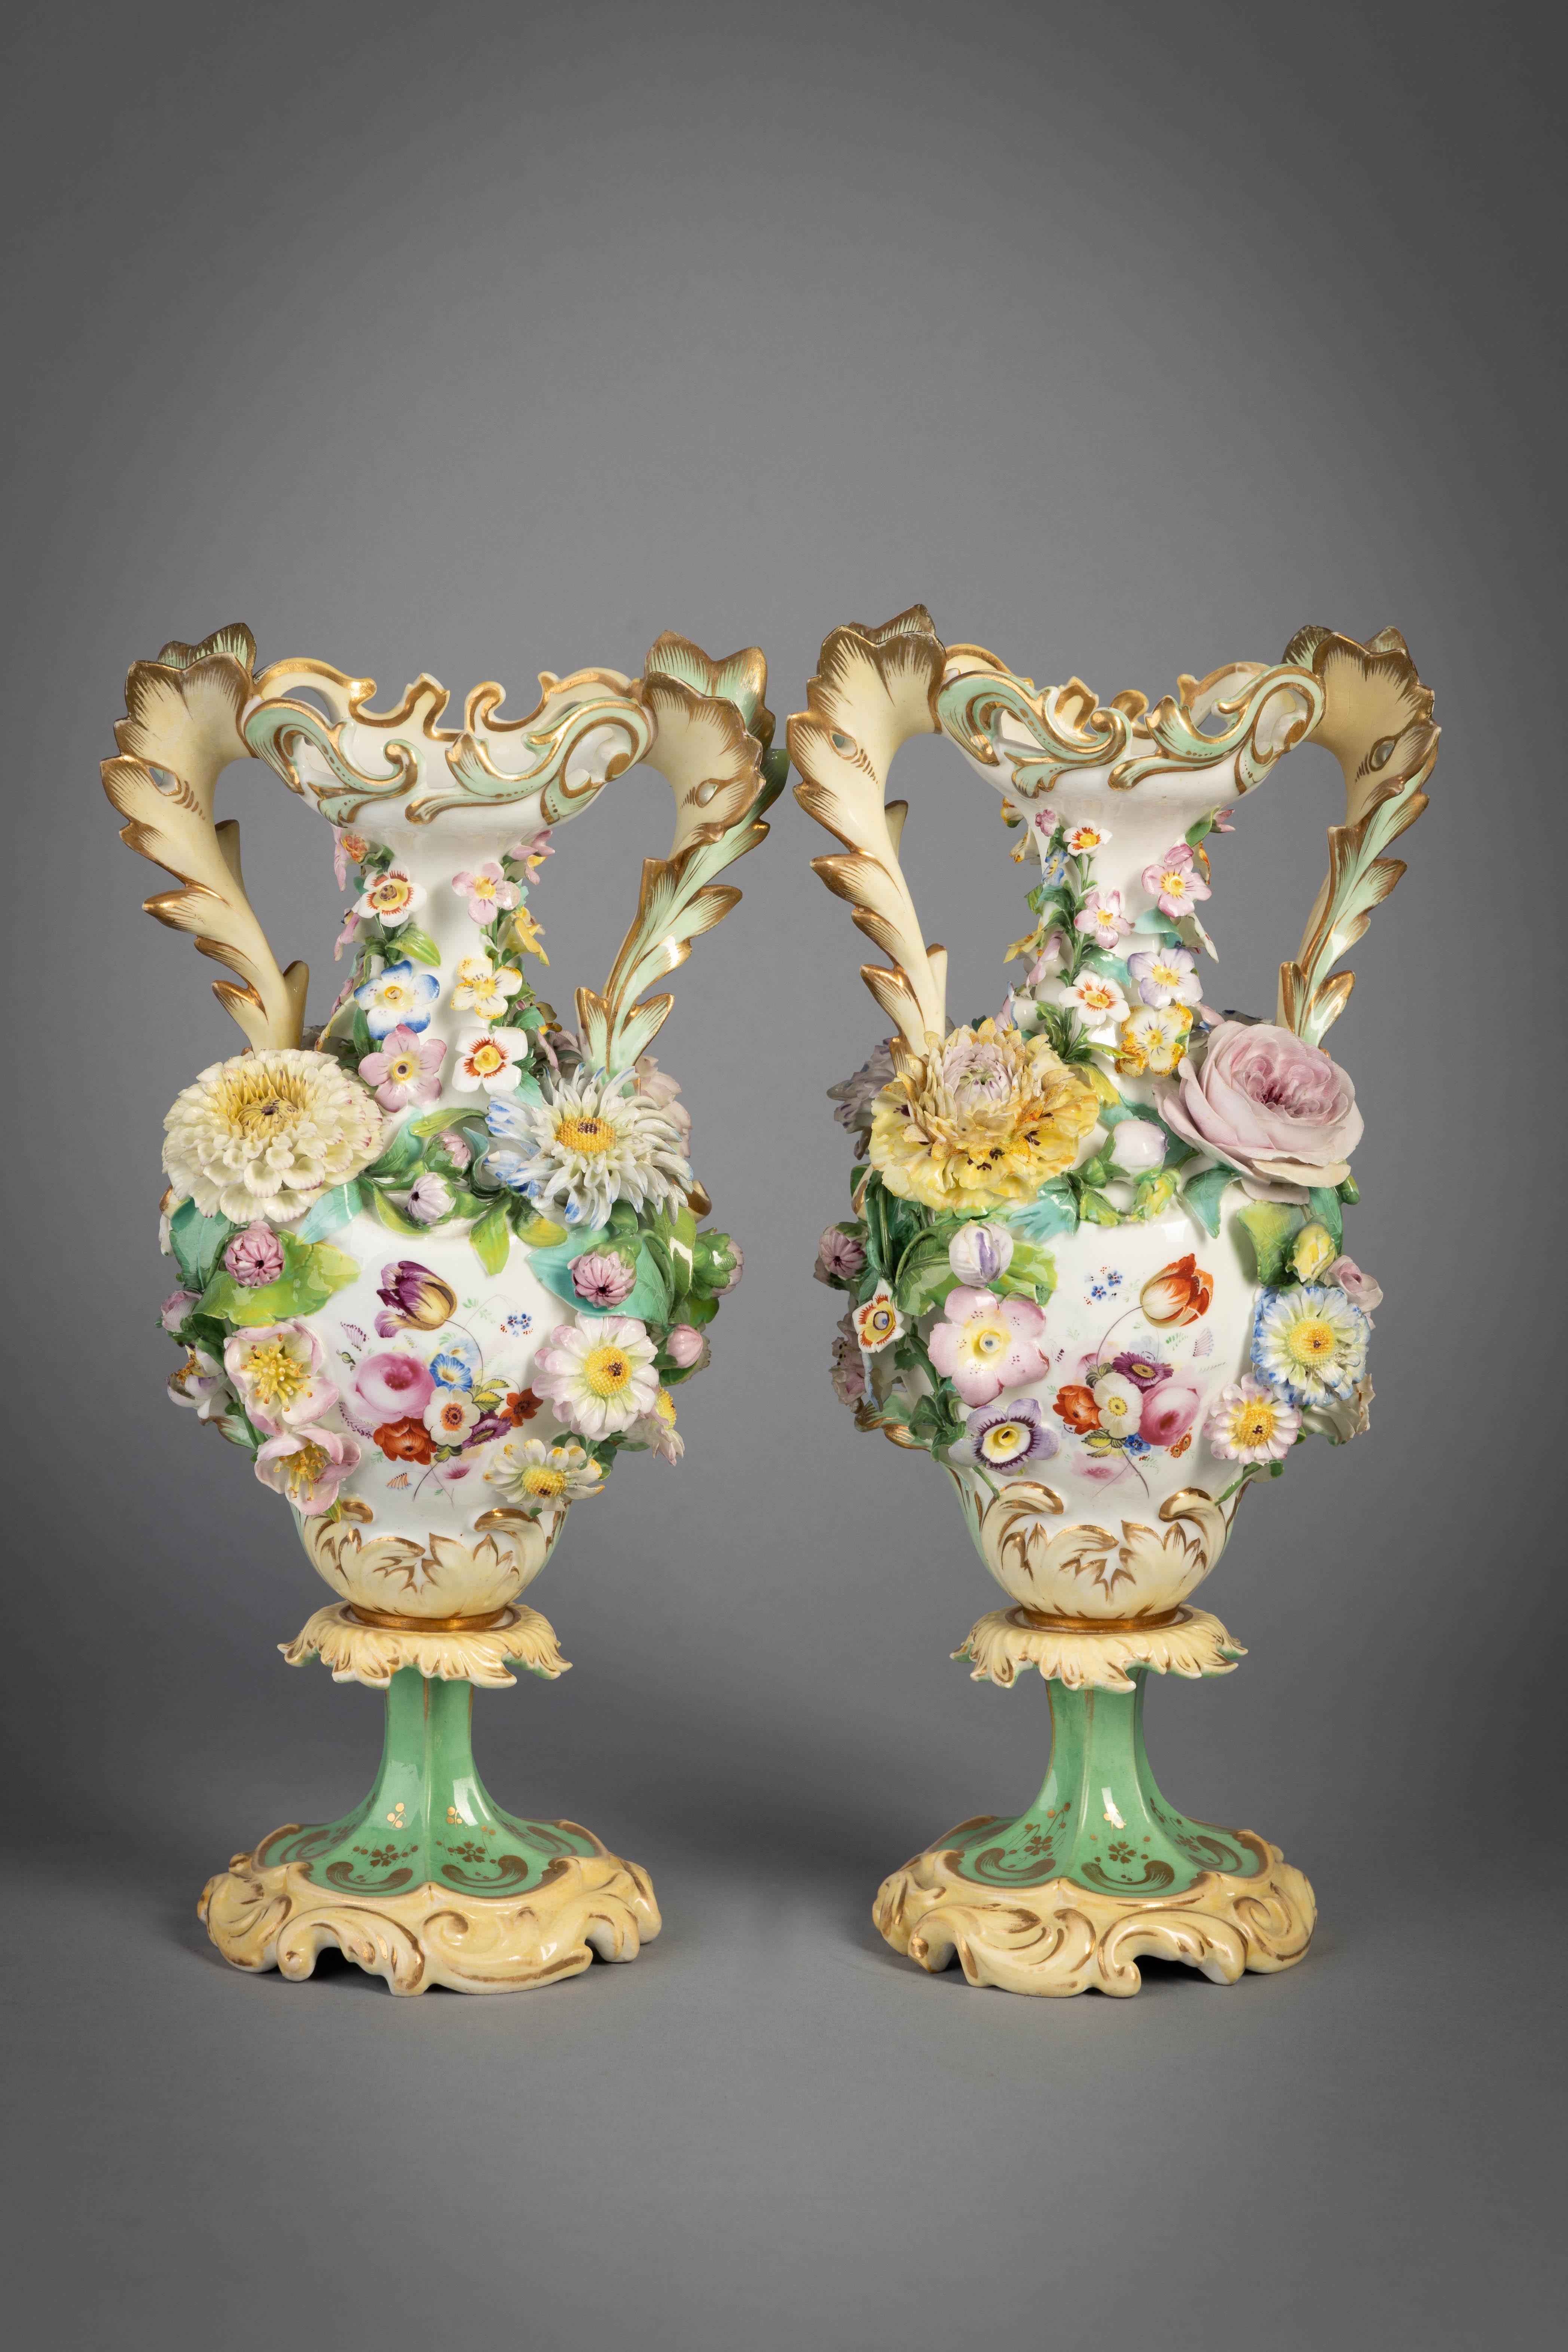 Pair of Coalbrookdale vases with applied flowers, circa 1840.